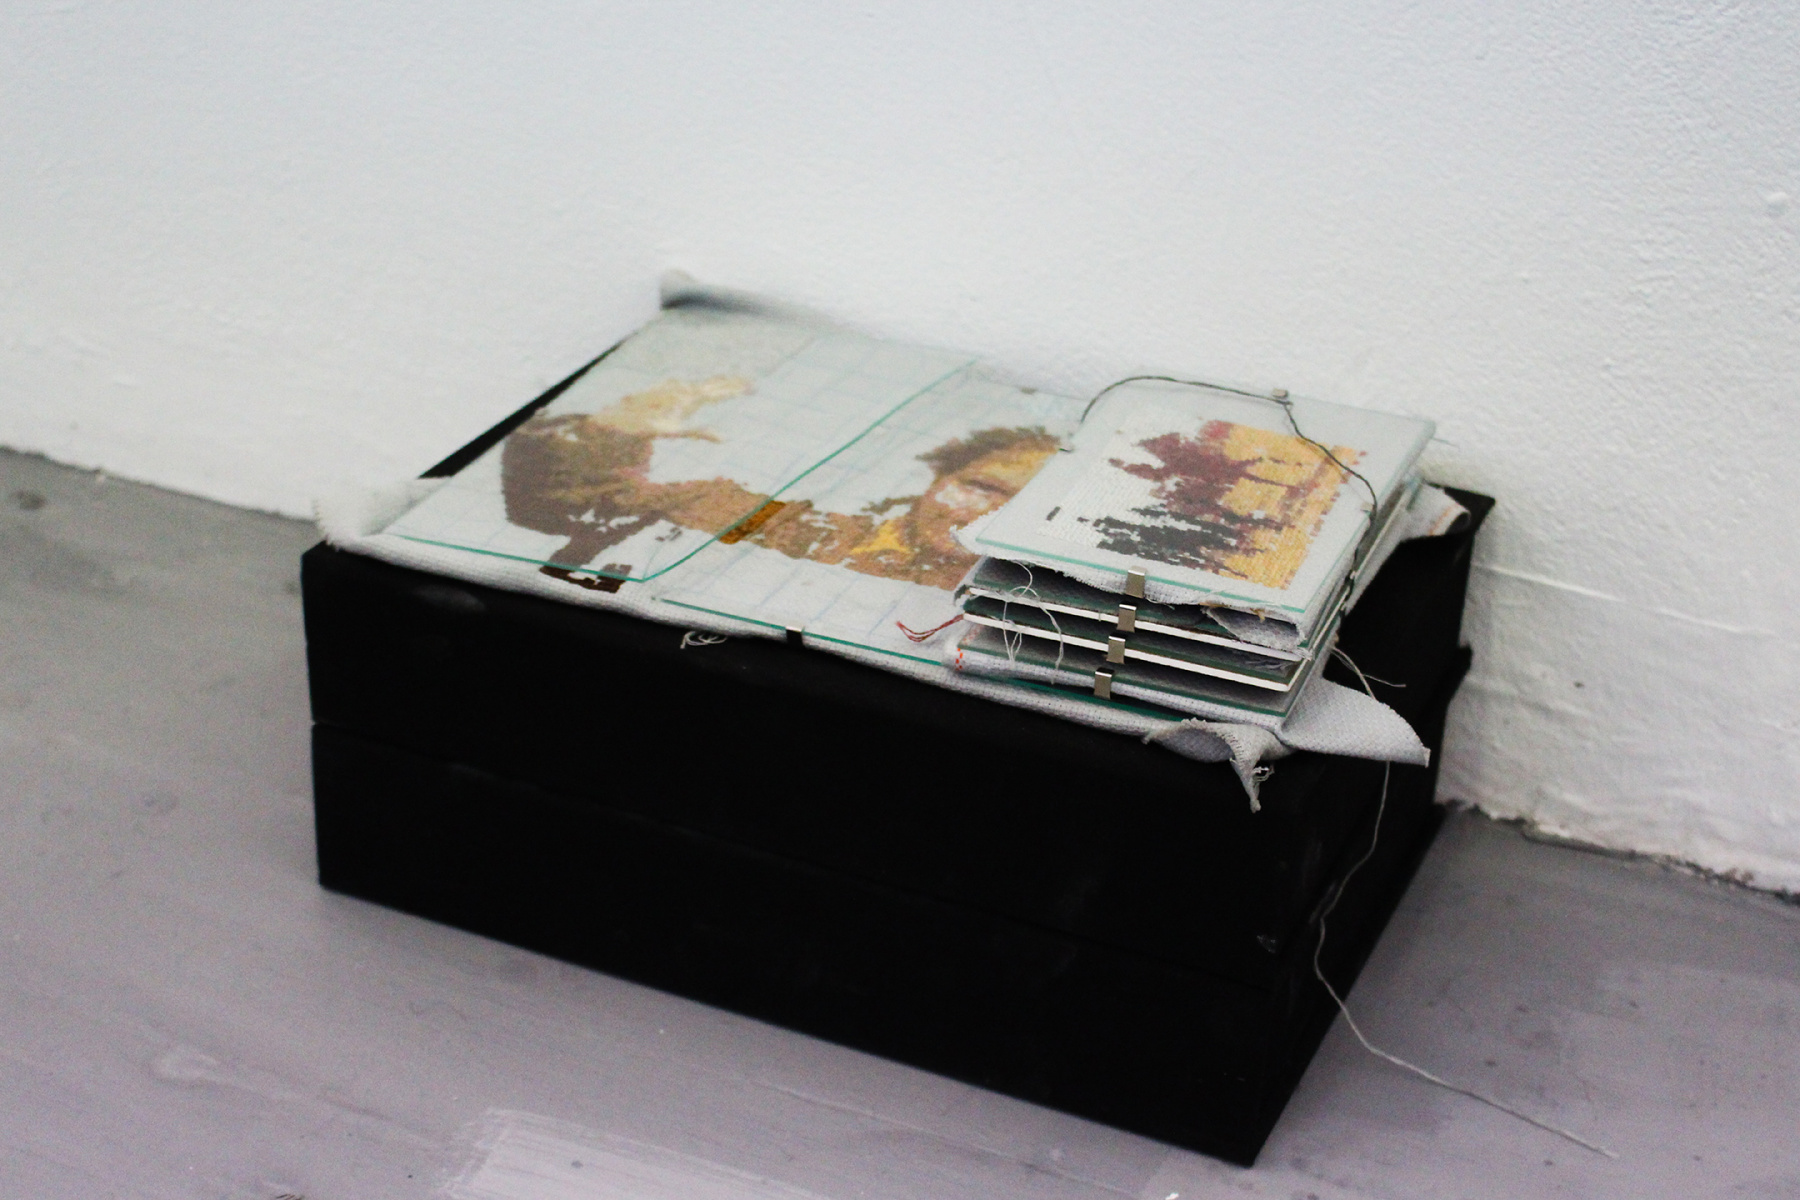 Installation photo of archival boxes, archival material, clip frames, broken glass, embroidery thread, cotton fabric.